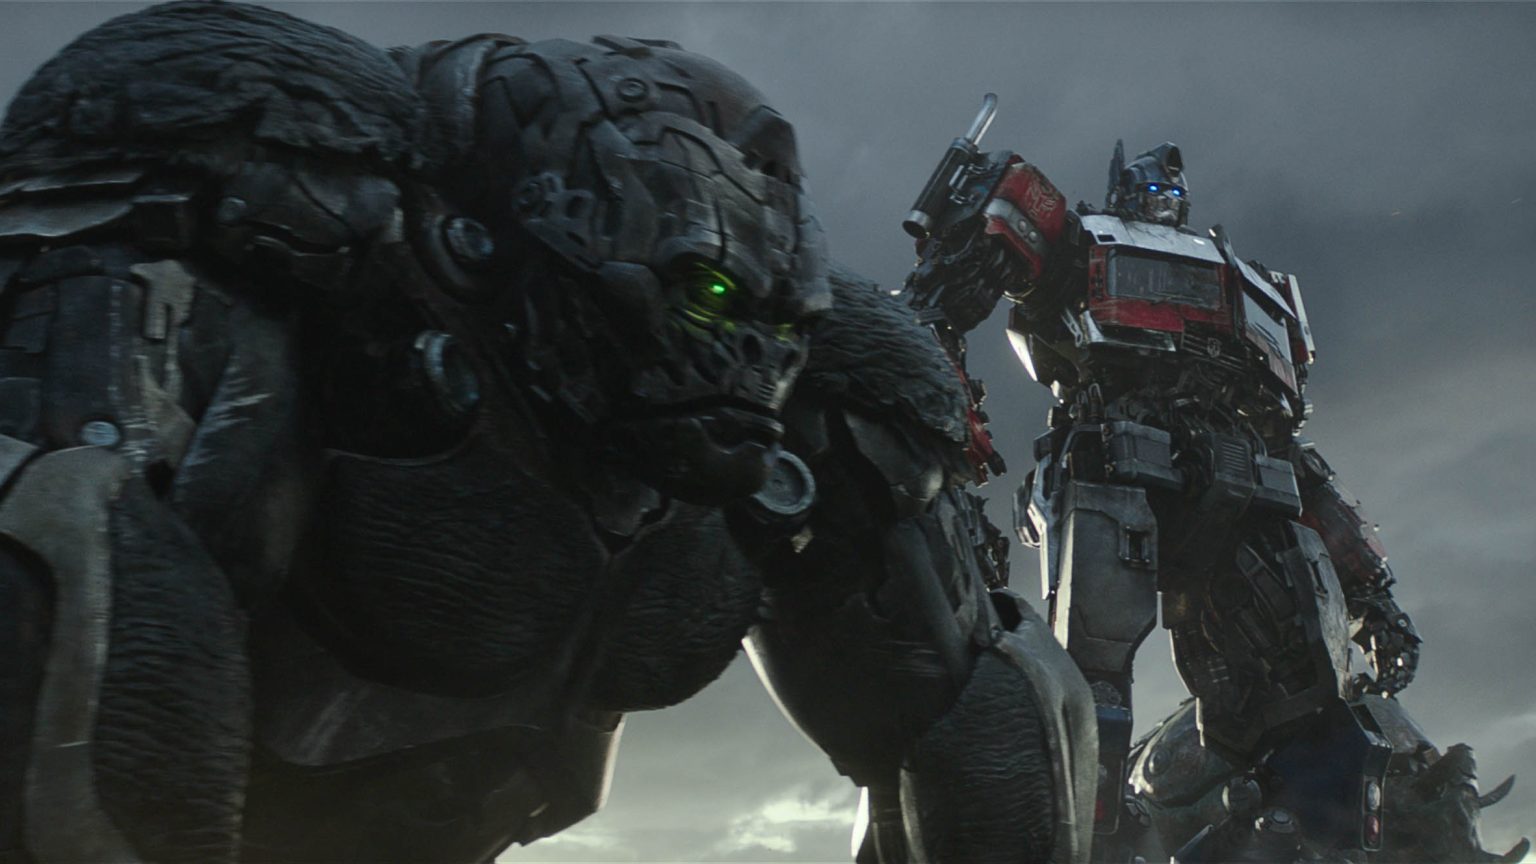 The maximal leader Optimus Primal in his huge gorilla form stands next to Optimus Prime in his classic robot form as they prepare to head into battle in TRANSFORMERS: RISE OF THE BEASTS.